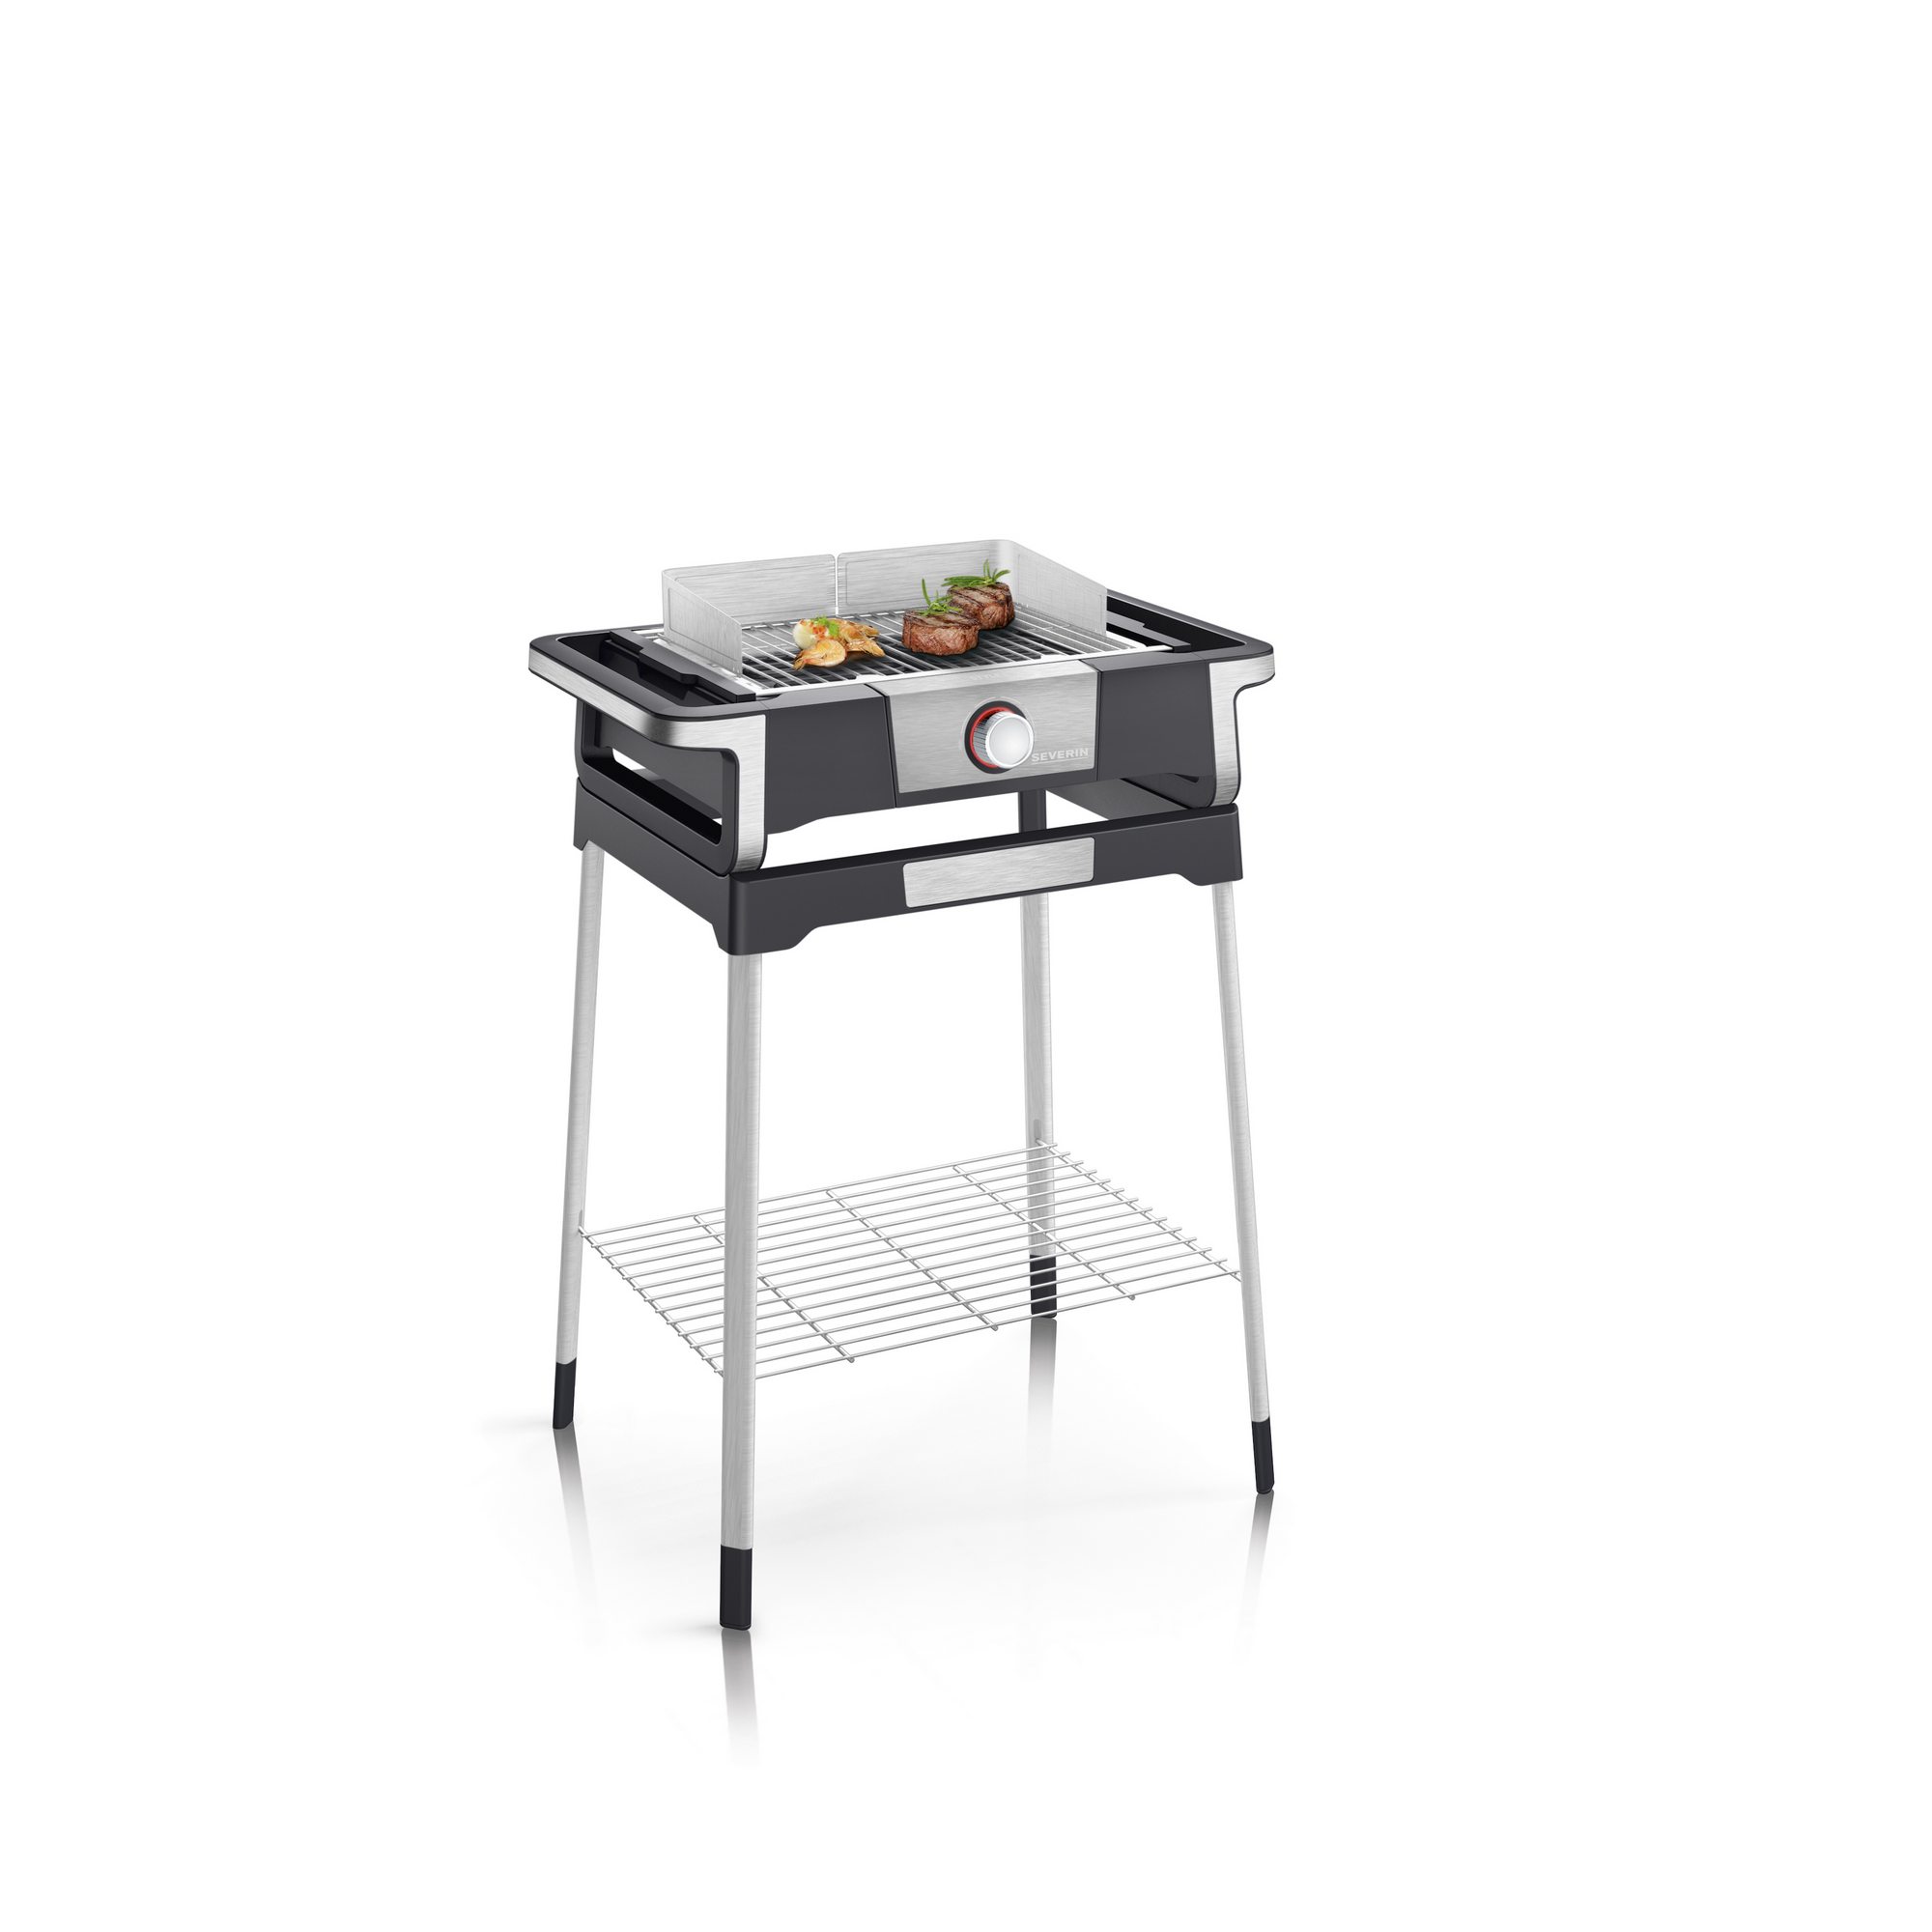 Elektrogrill 'PG 8116 Style' 2500 W + product picture